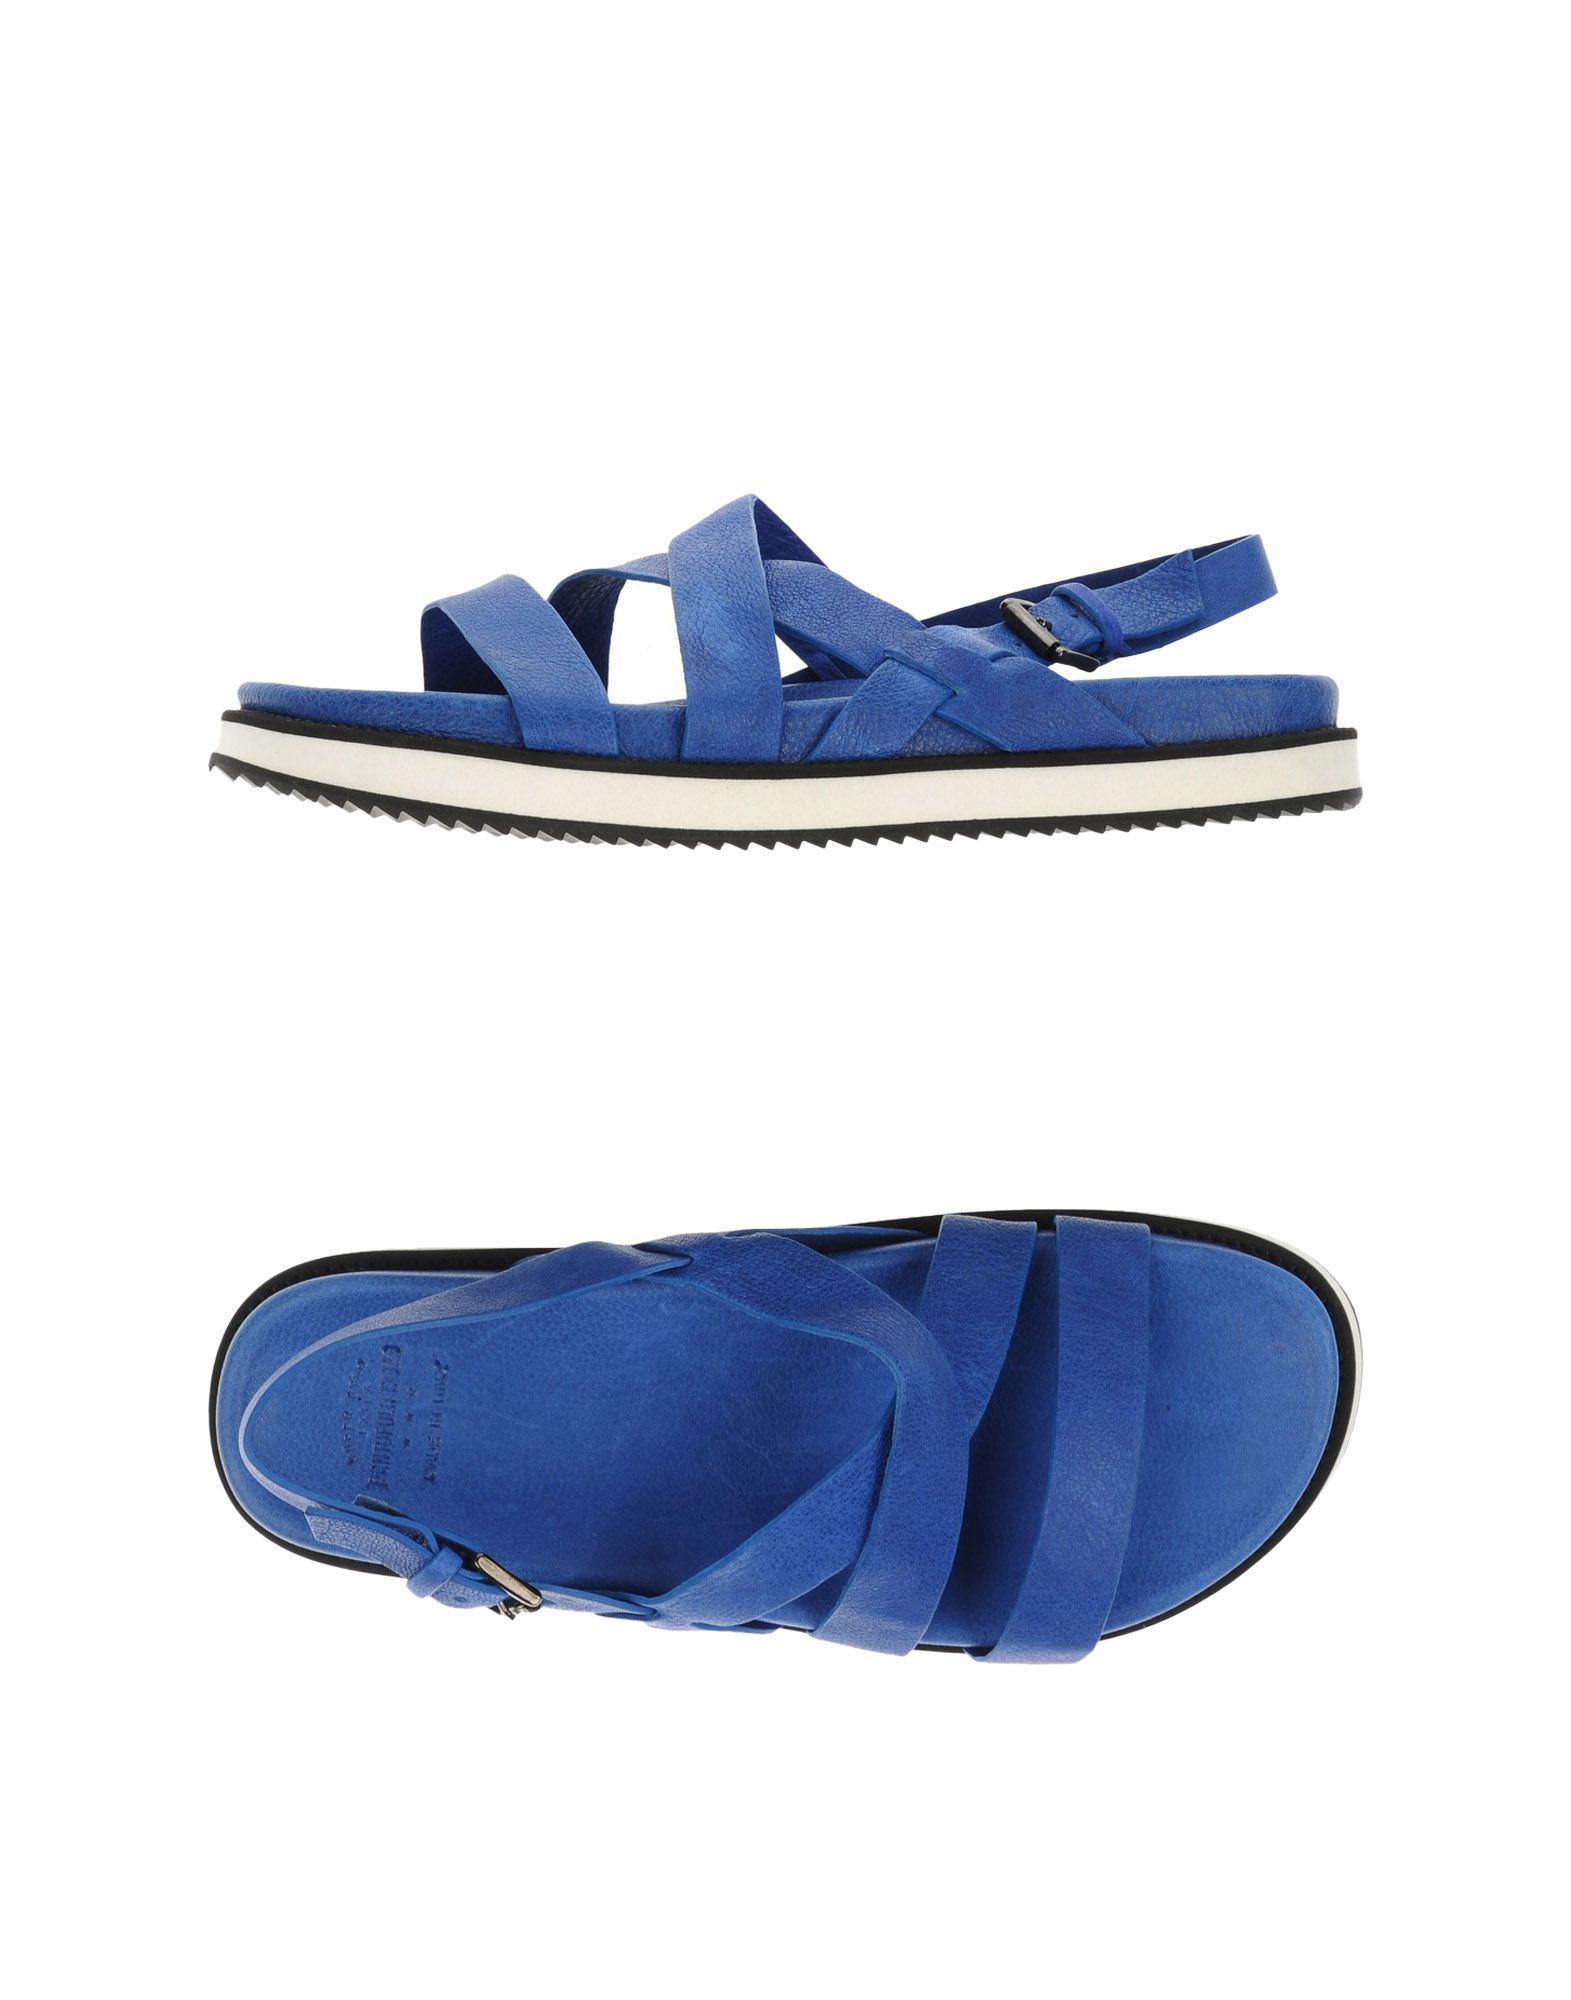 Pantofola D'oro Sandals In Bright Blue